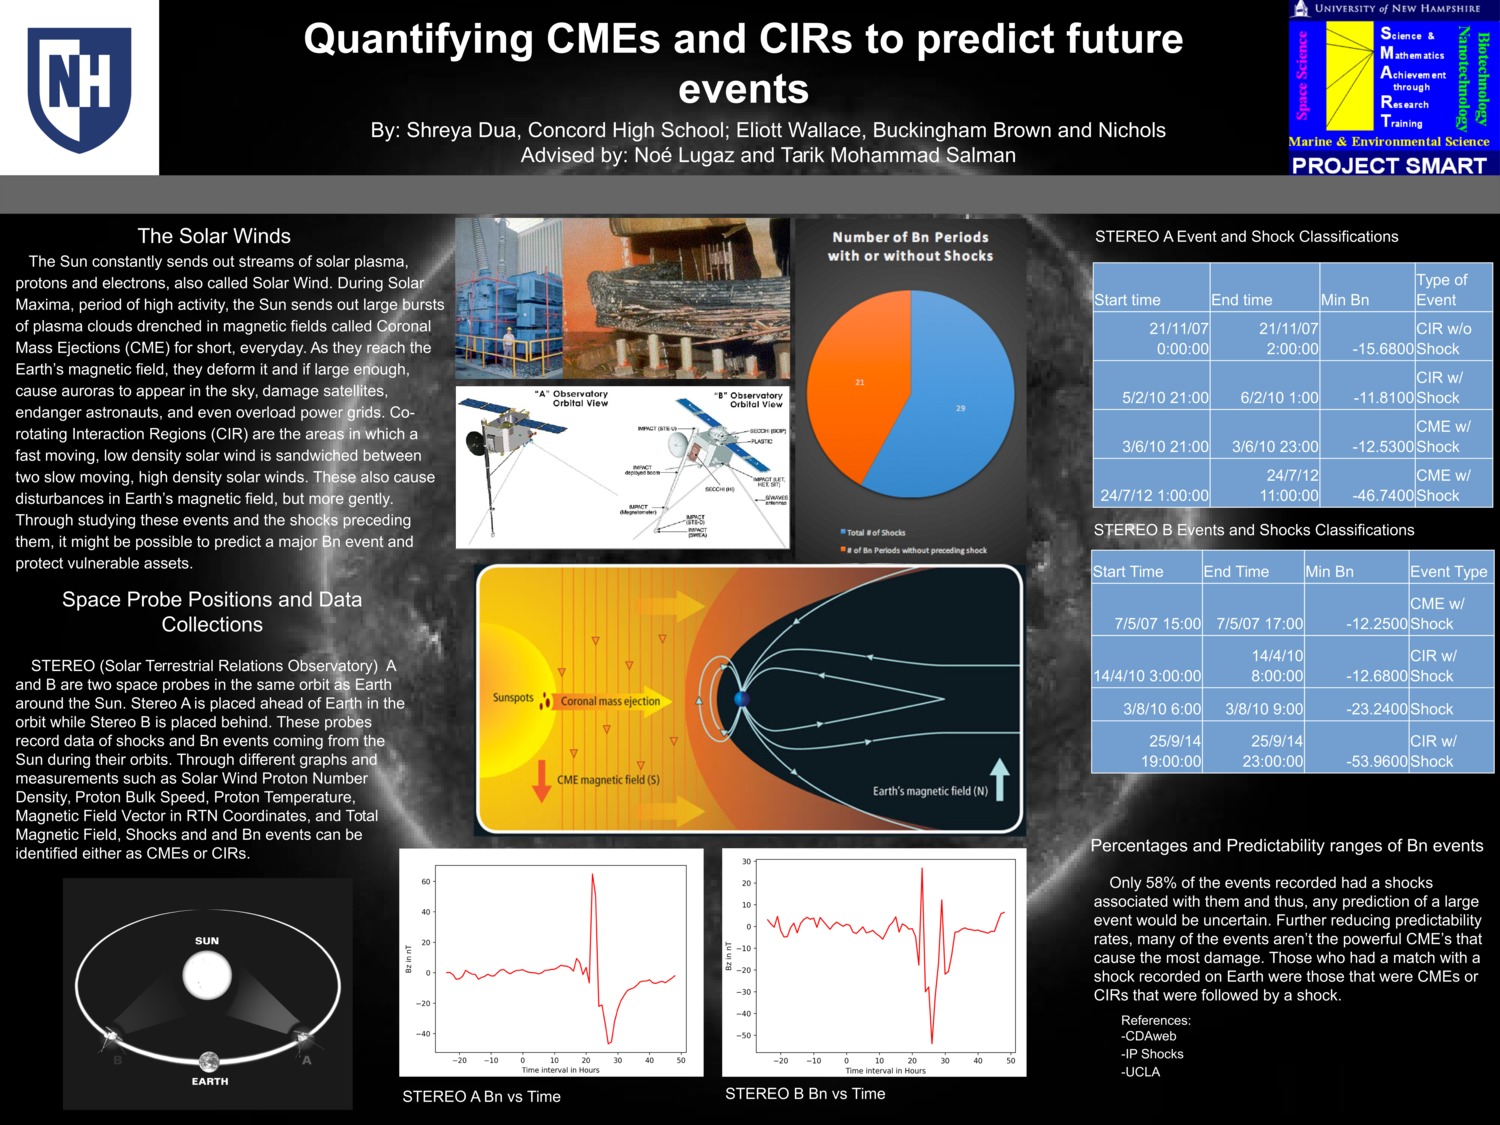 Cmes And Cirs by CWSmith